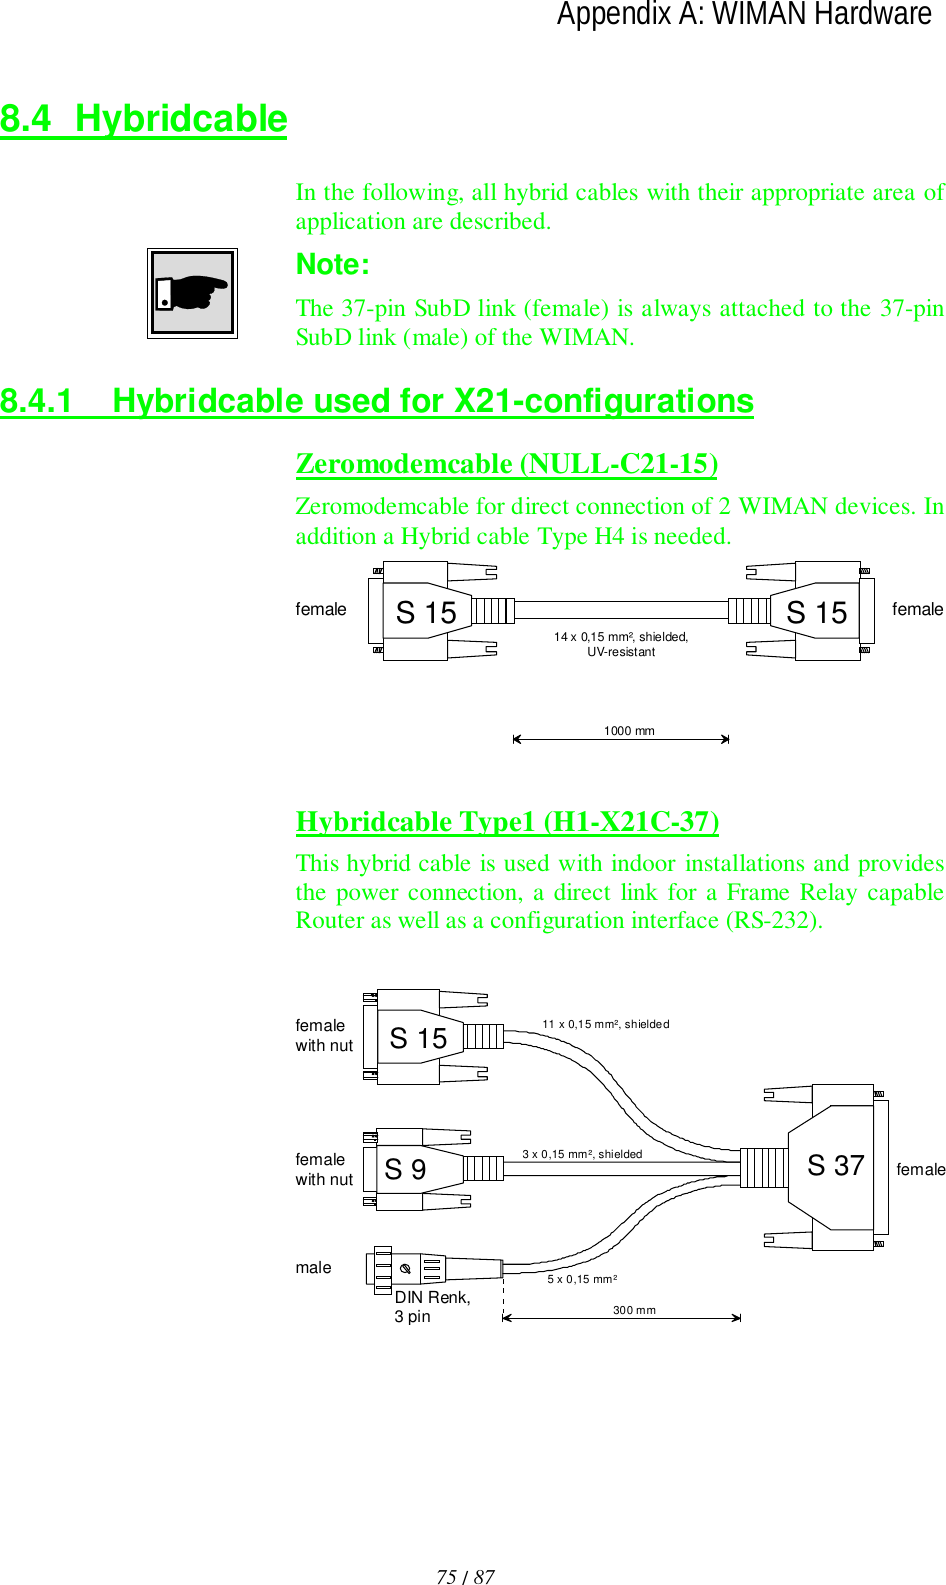 75 / 87lAppendix A: WIMAN Hardware8.4 HybridcableIn the following, all hybrid cables with their appropriate area ofapplication are described.Note:The 37-pin SubD link (female) is always attached to the 37-pinSubD link (male) of the WIMAN.8.4.1  Hybridcable used for X21-configurationsZeromodemcable (NULL-C21-15)Zeromodemcable for direct connection of 2 WIMAN devices. Inaddition a Hybrid cable Type H4 is needed.female14 x 0,15 mm², shielded,UV-resistant1000 mmS 15 S 15 femaleHybridcable Type1 (H1-X21C-37)This hybrid cable is used with indoor installations and providesthe power connection, a direct link for a Frame Relay capableRouter as well as a configuration interface (RS-232).S 37malefemale11 x 0,15 mm², shielded3 x 0,15 mm², shielded5 x 0,15 mm²femalewith nut300 mmS 15DIN Renk,3 pinS 9femalewith nut